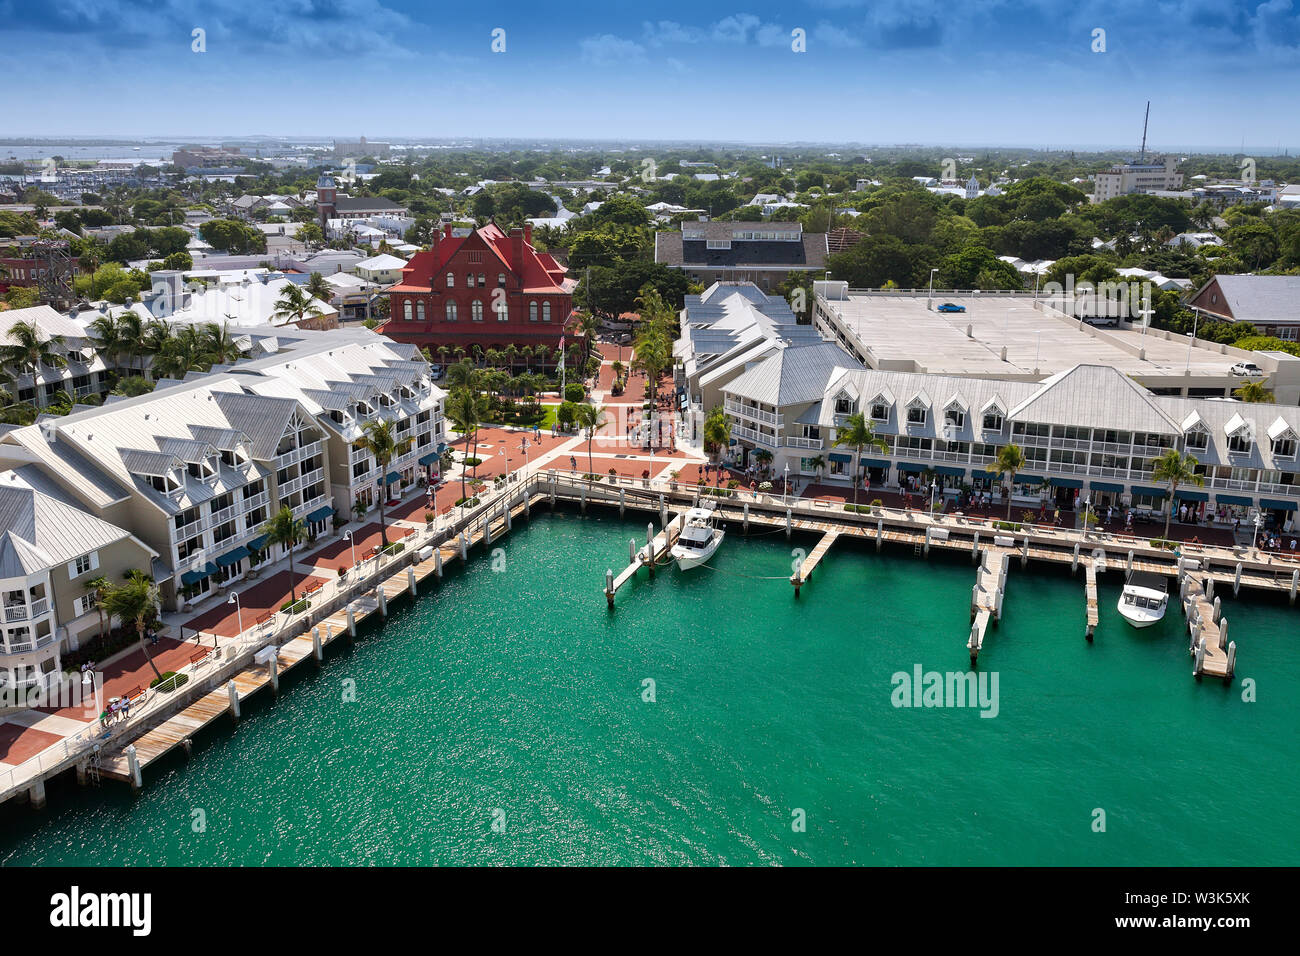 Key West, Florida - July 11, 2011:  Port of Key West filled with cruise ship passengers and tourists. Stock Photo